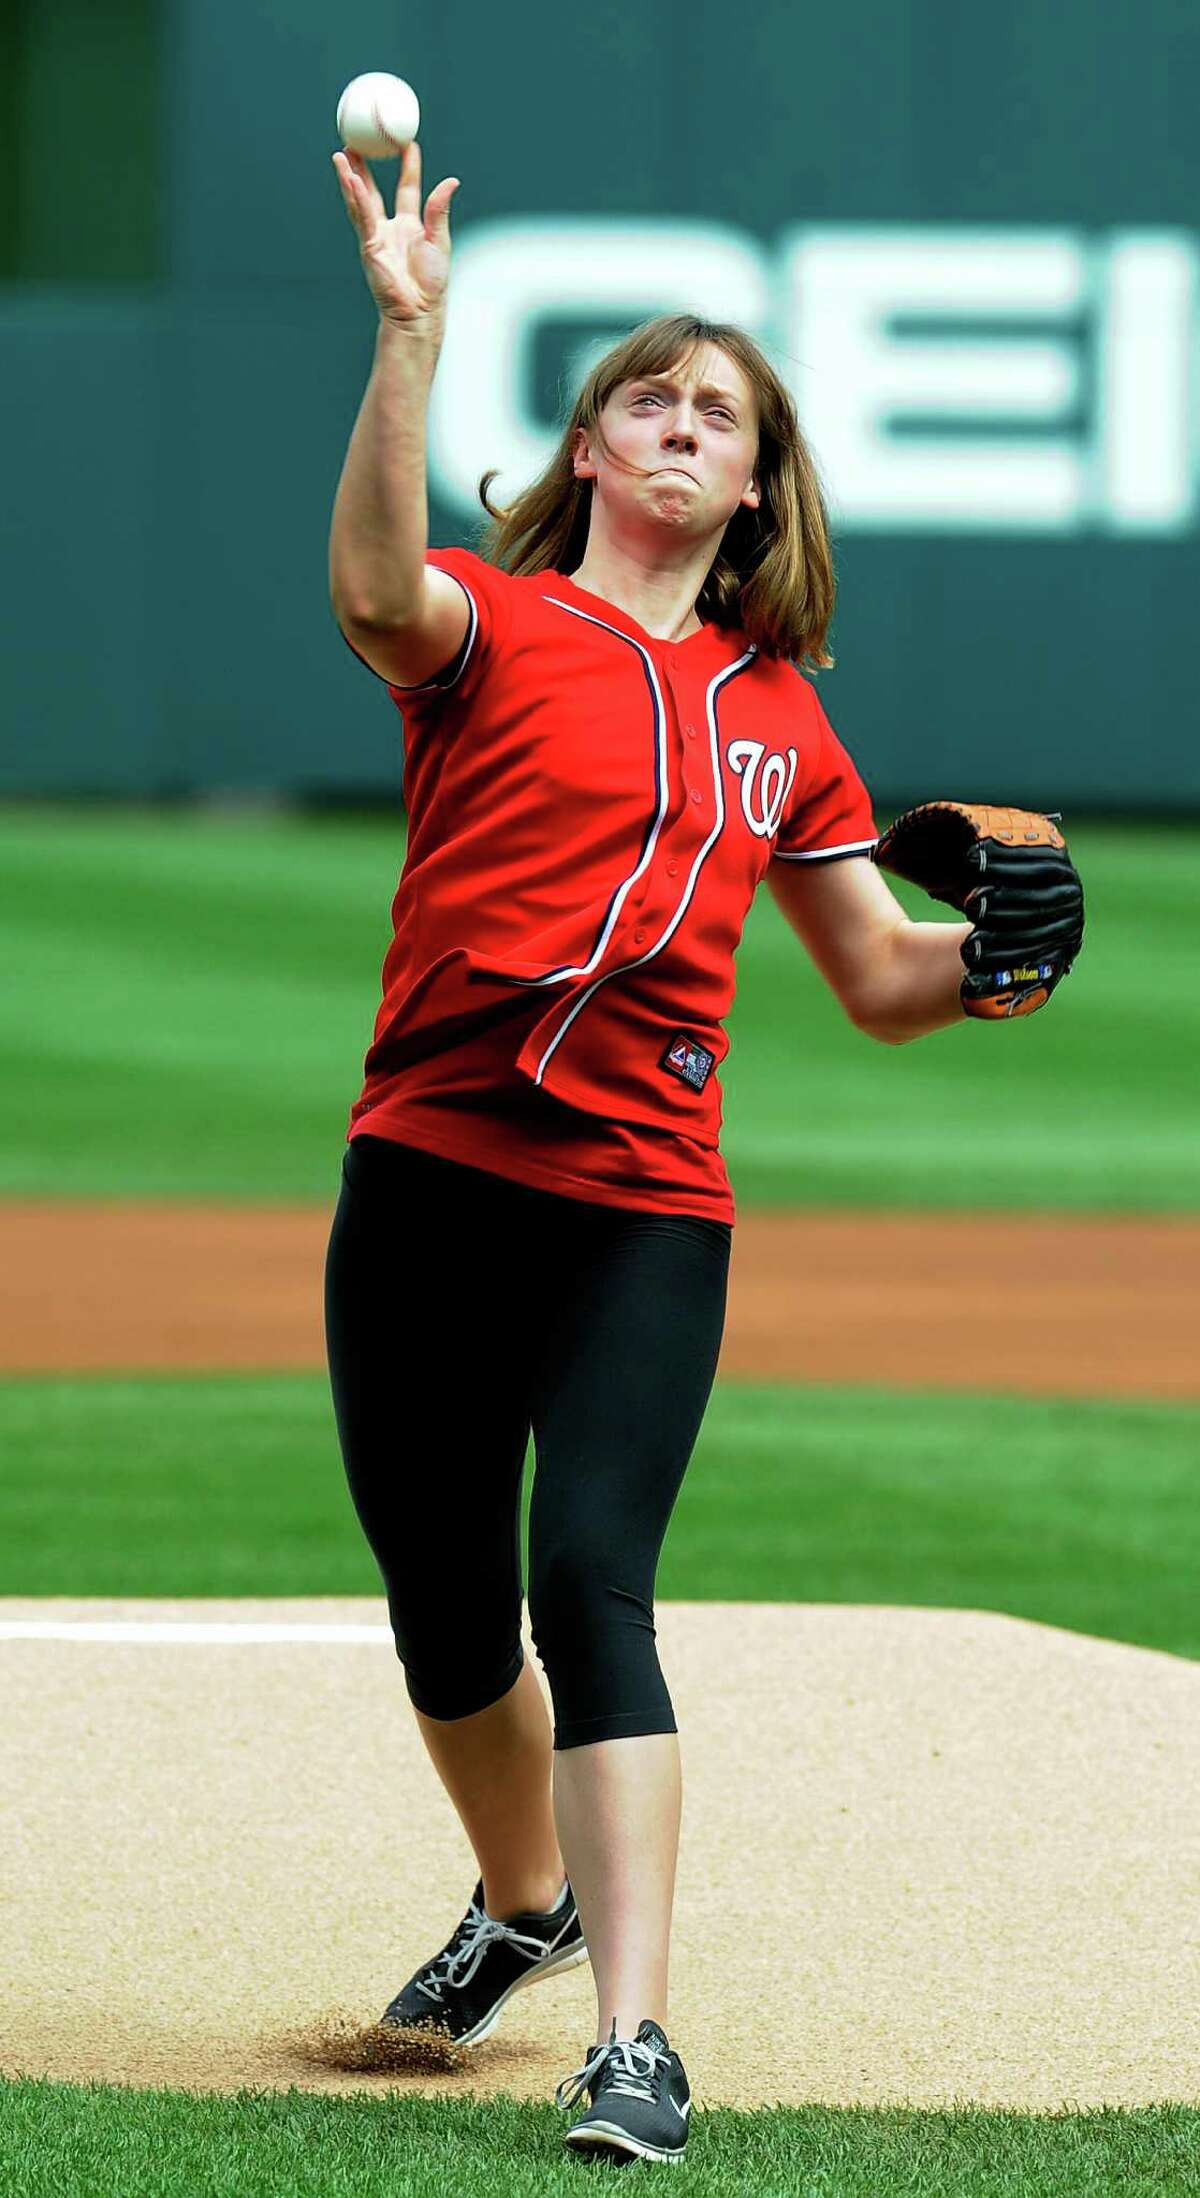 Gold medal swimmer Katie Ledecky, 15, throws out the first pitch before the Nationals-Cubs game in Washington.